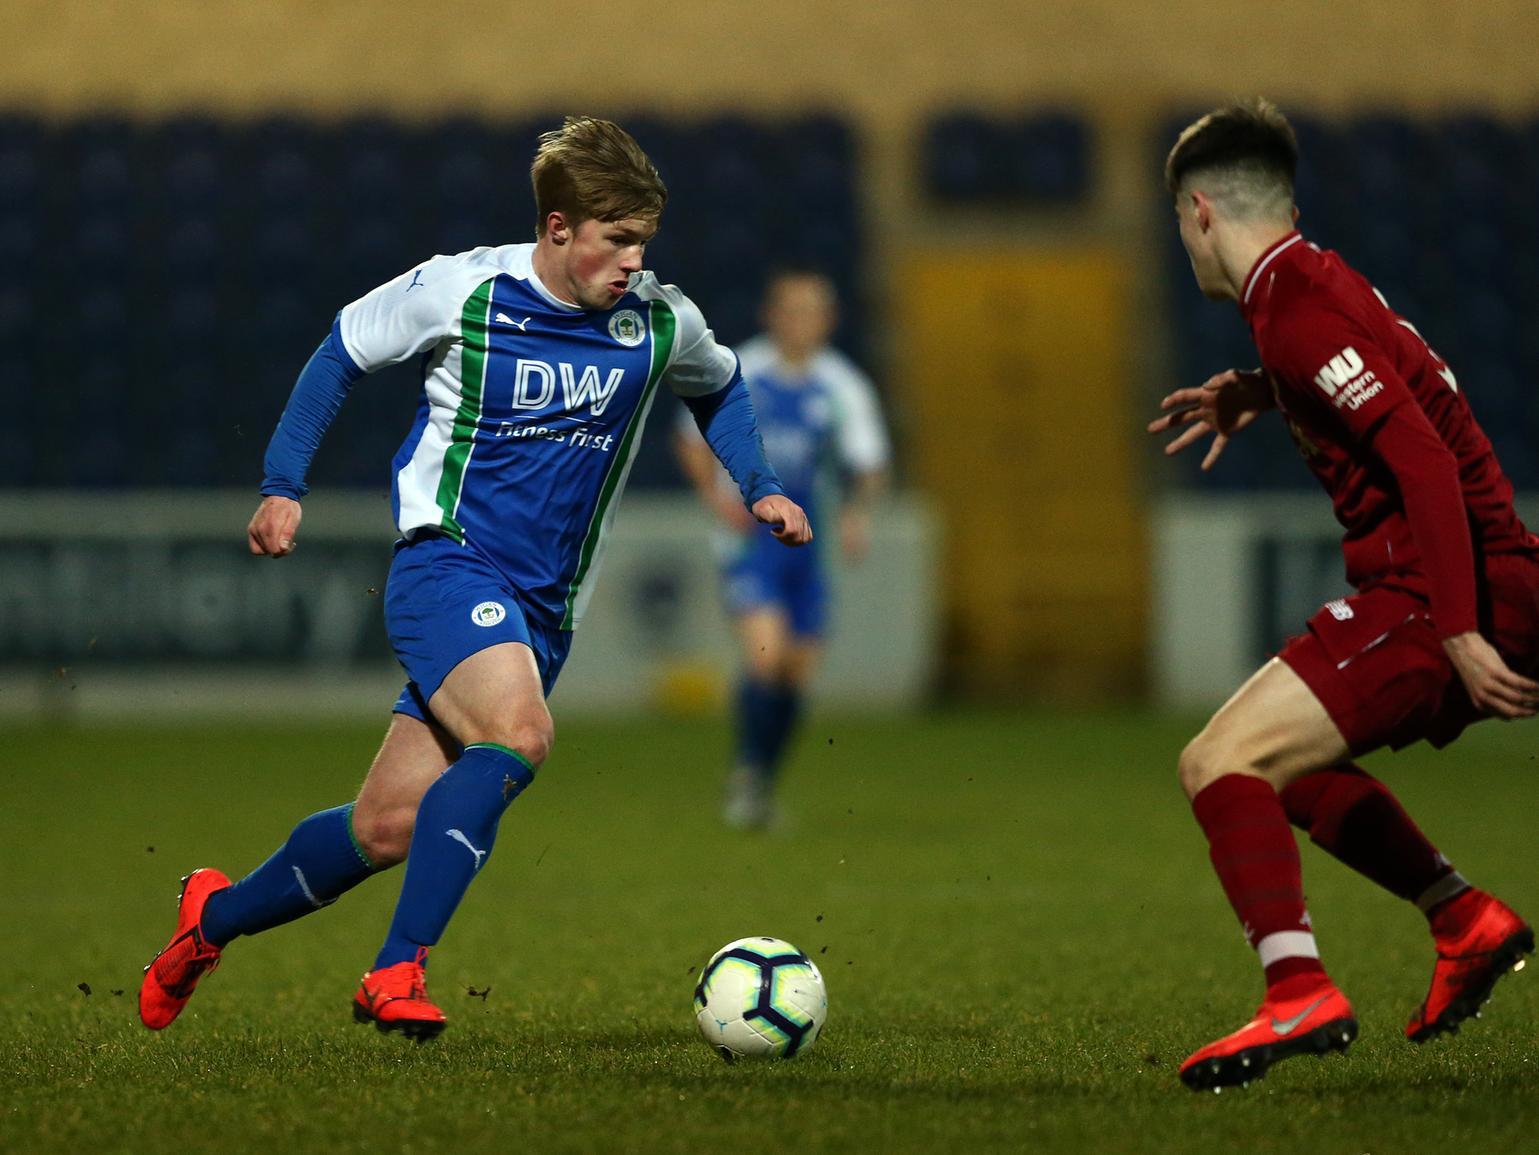 Chelsea are rumoured to be the latest side to take a serious interest in Wigan Athletic starlet Joe Gelhardt, with the likes of Liverpool, Manchester City and Everton also said to be keen. (Daily Star)